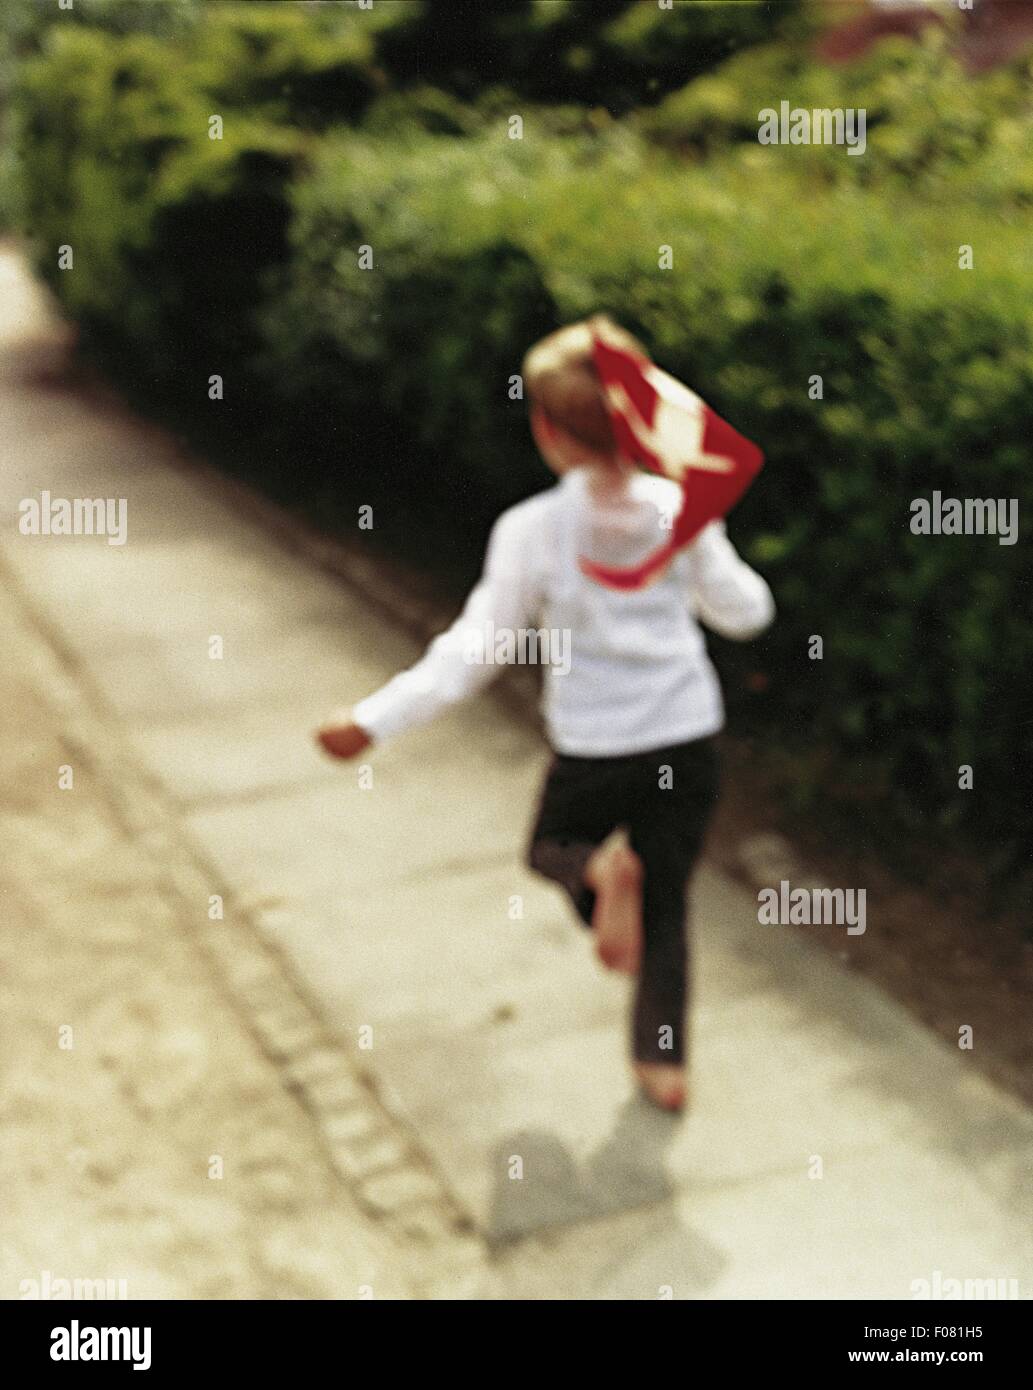 Rear view of little boy running barefoot with Danish national flag, blurred motion Stock Photo